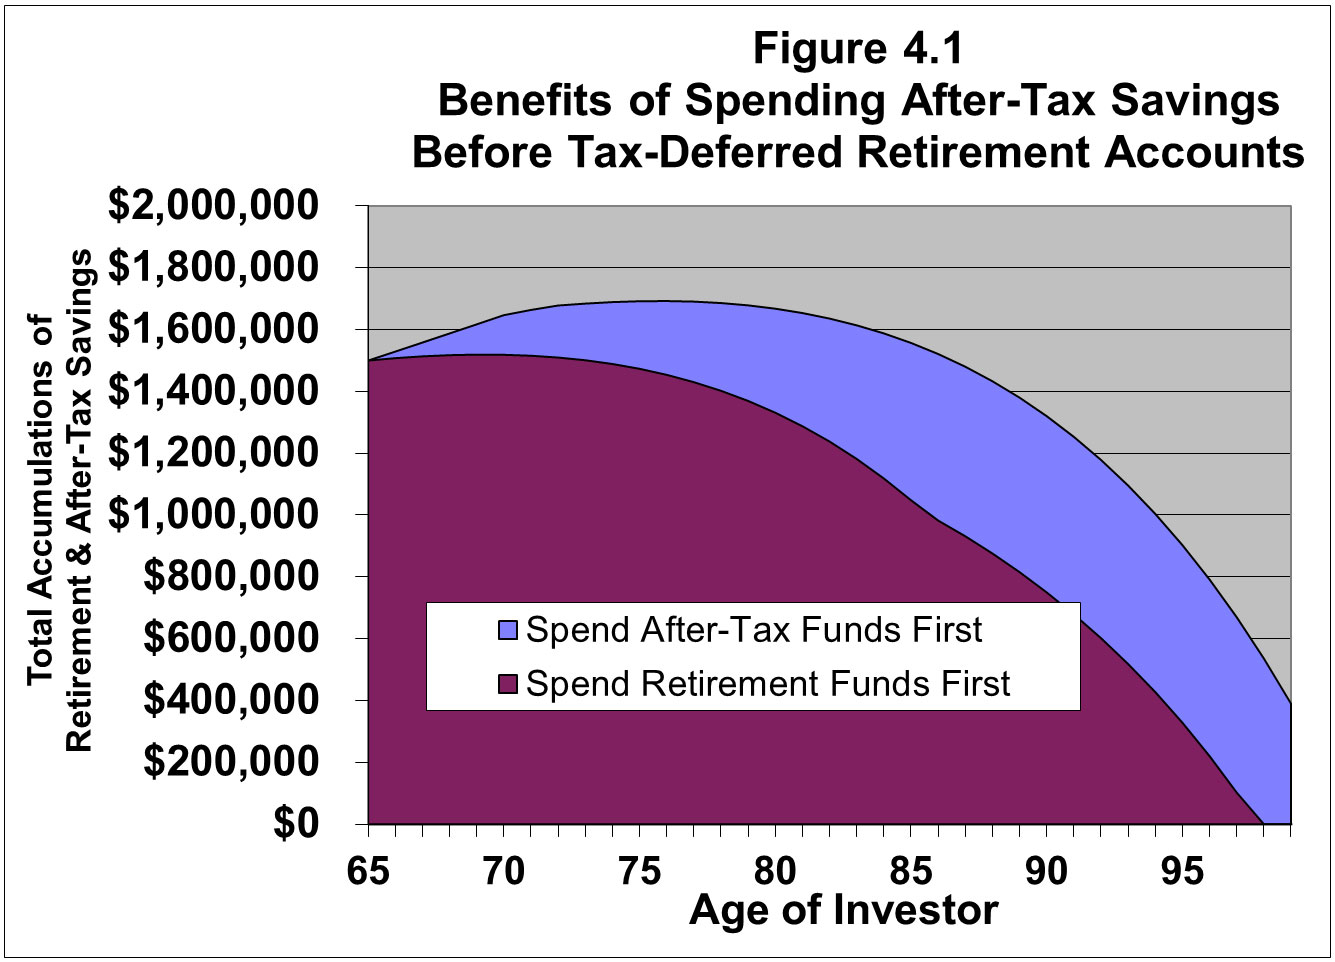 Should I take my Social Security benefits now or spend my retirement savings and apply and suspend?